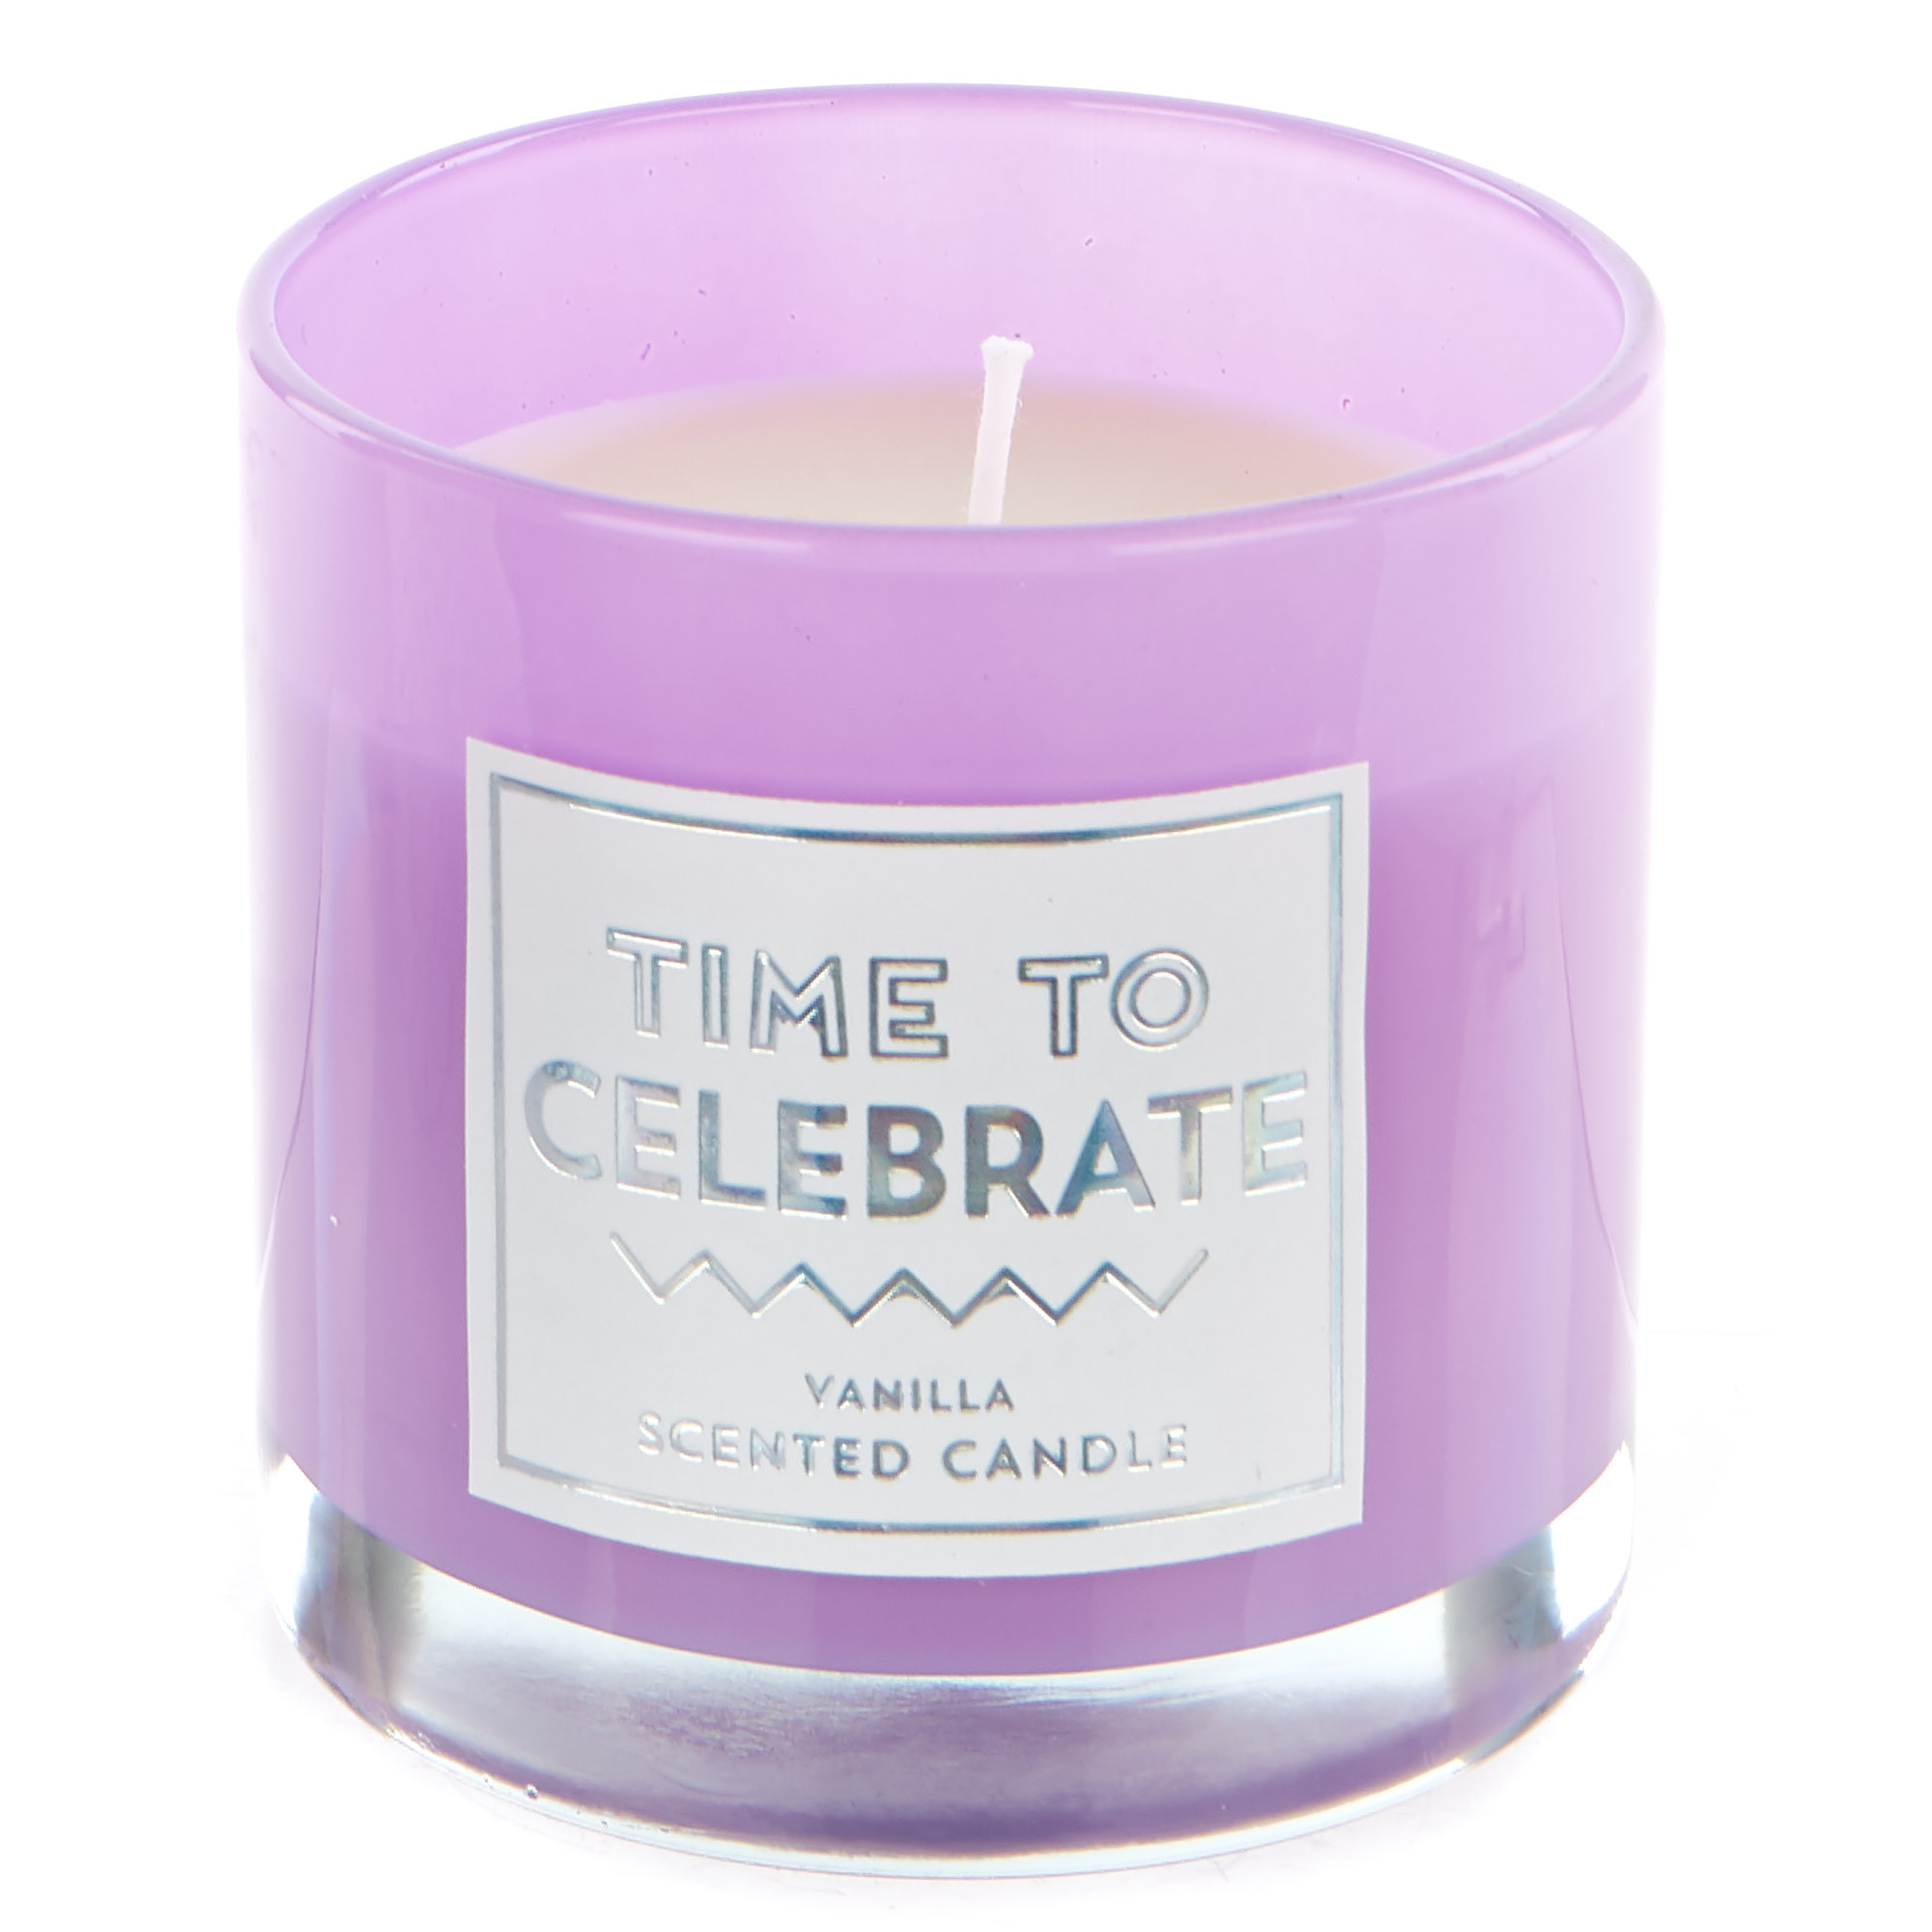 Time To Celebrate Vanilla Scented Celebration Candle